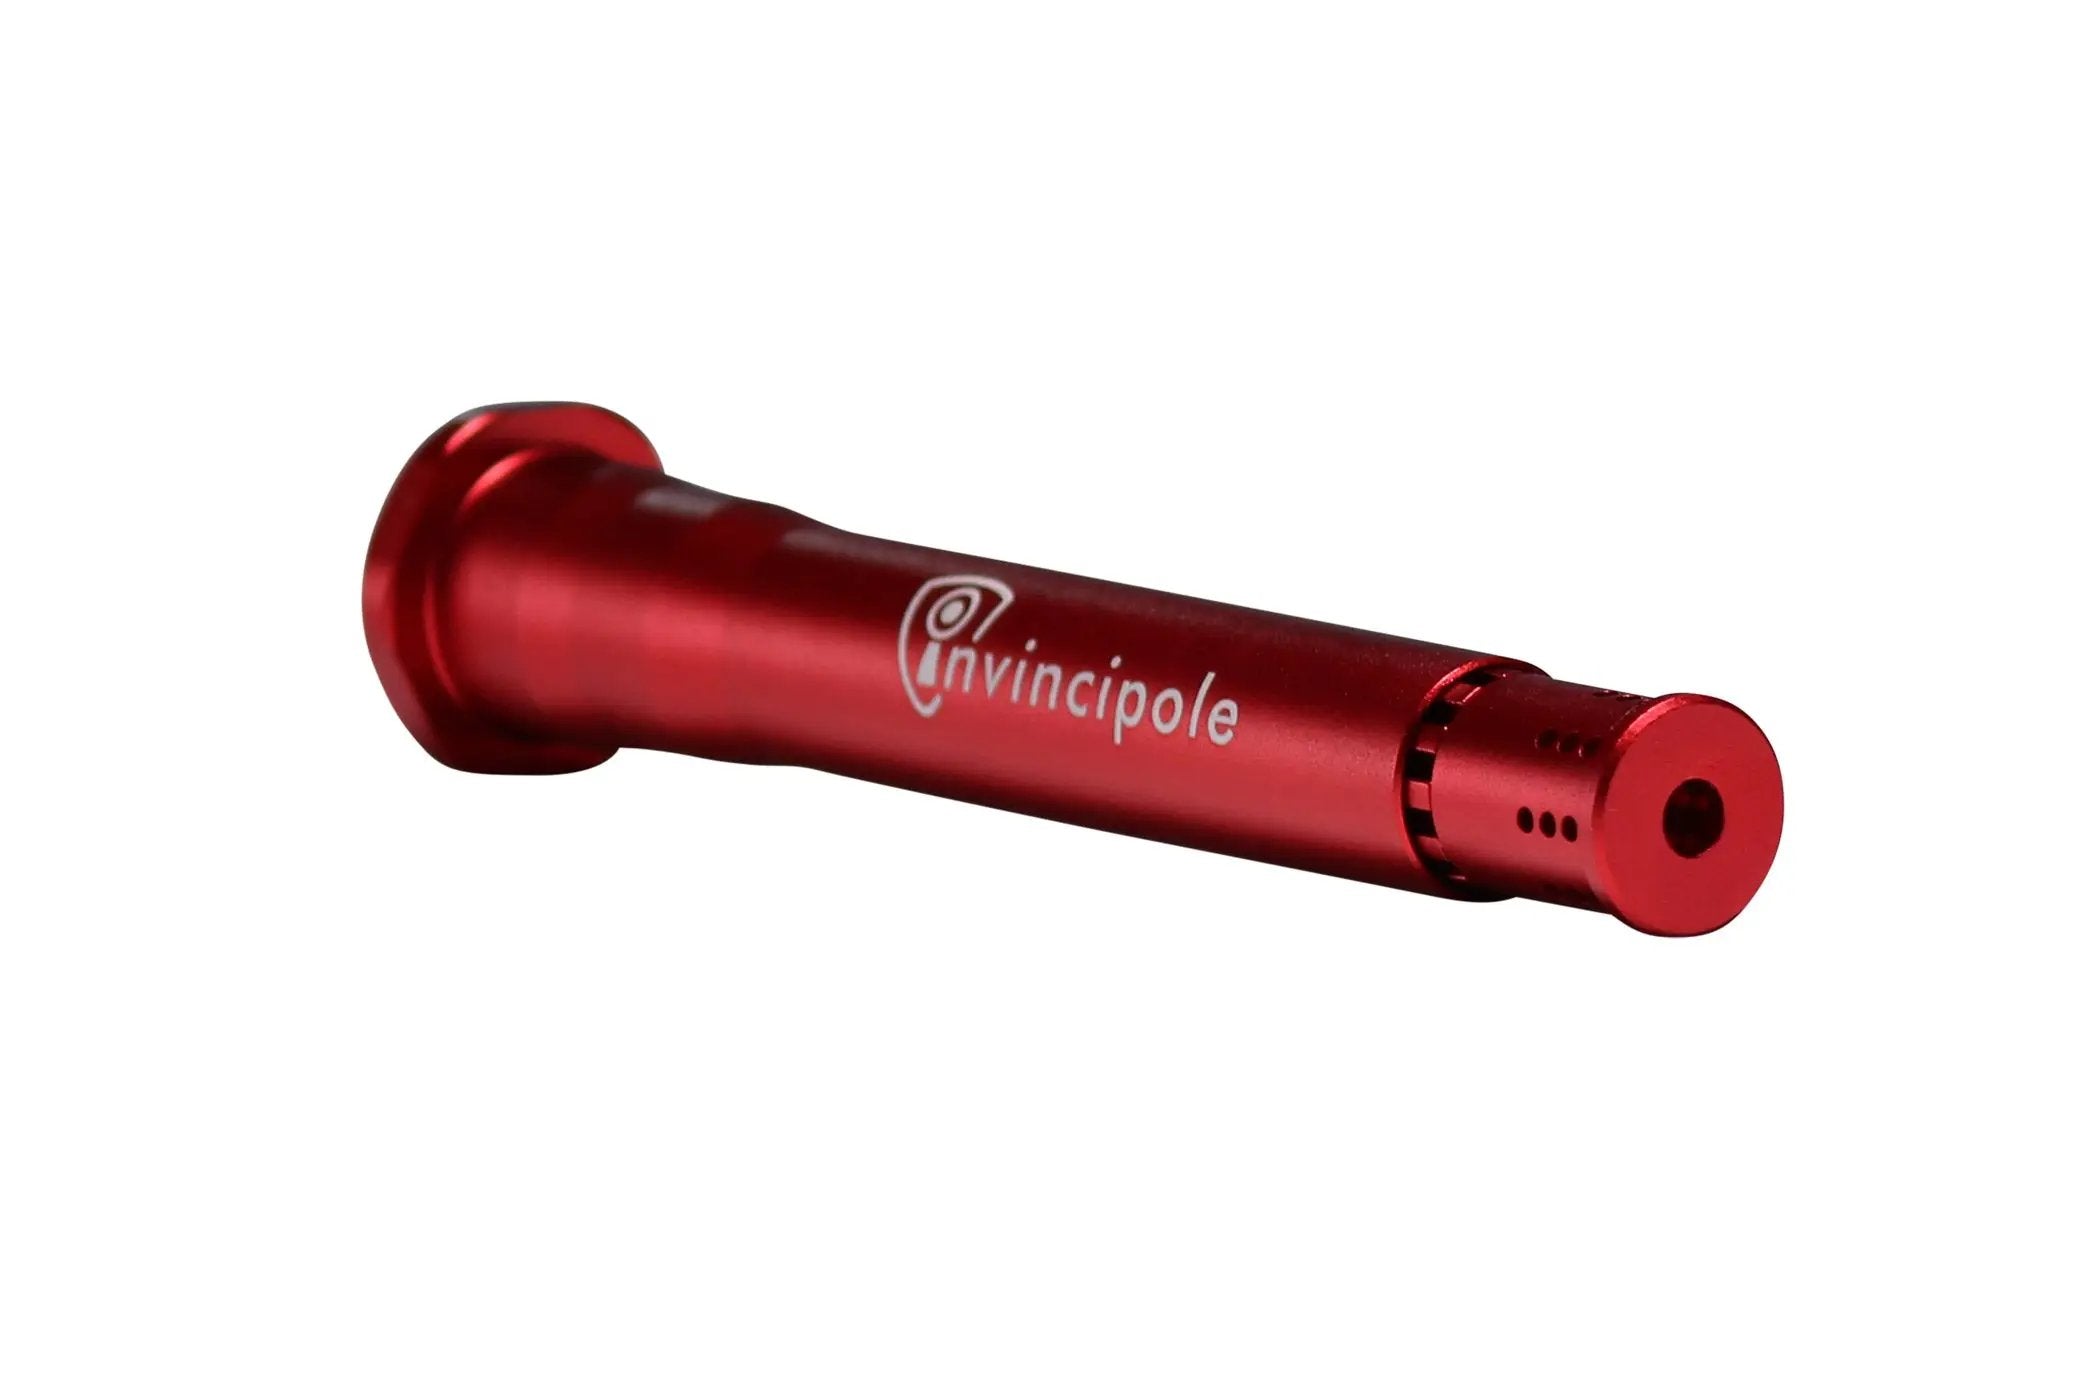 Invincibowl - SIREN INVINCIPOLE INFINITY- RED 18MM/14MM DOWNSTEM by Chill Steel Pipes